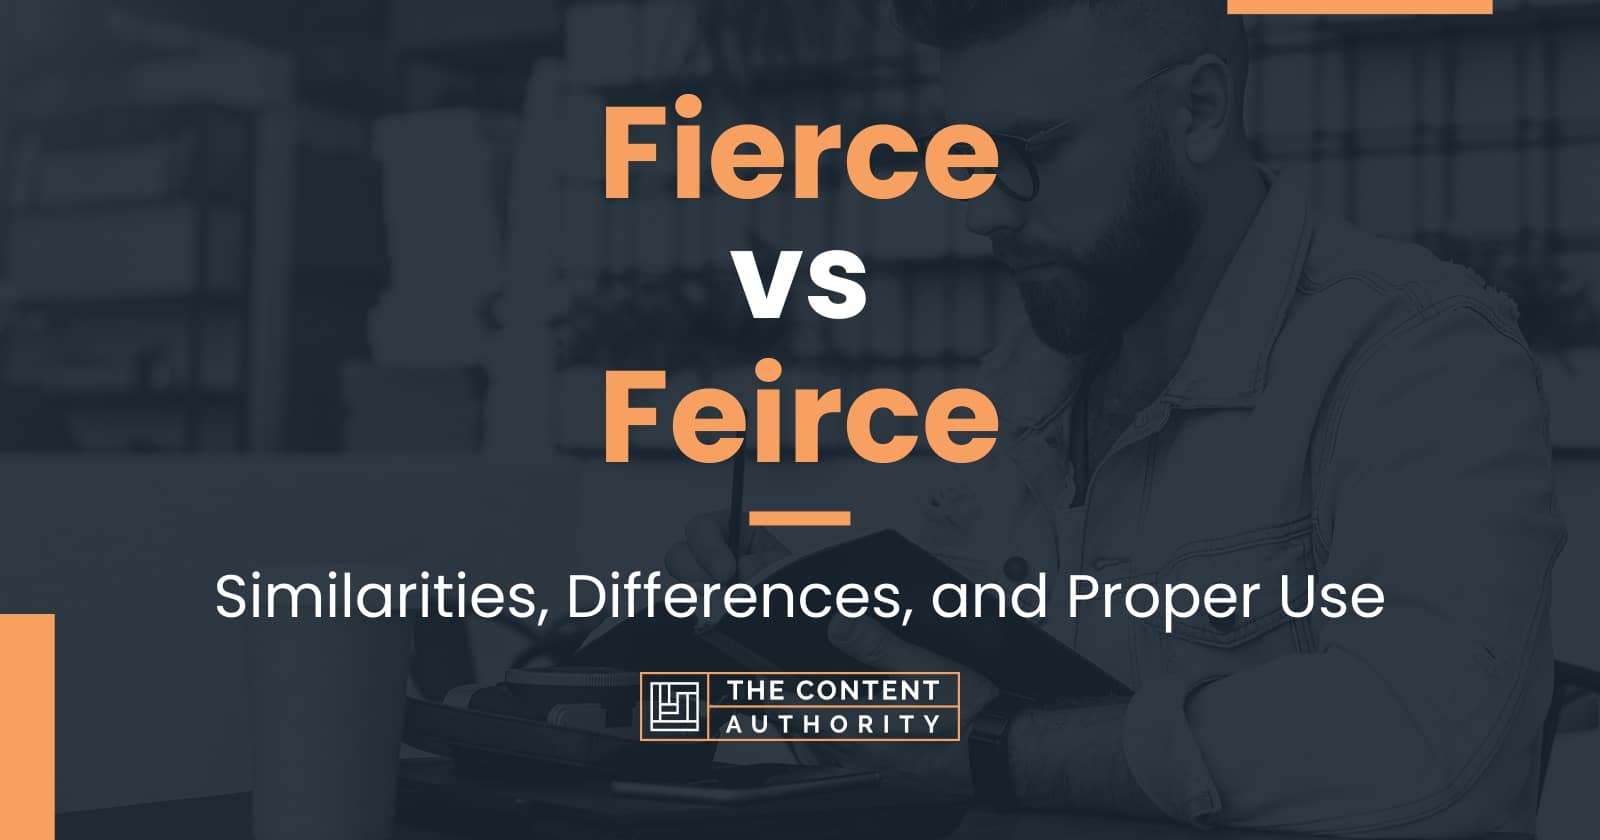 Fierce vs Feirce: Similarities, Differences, and Proper Use